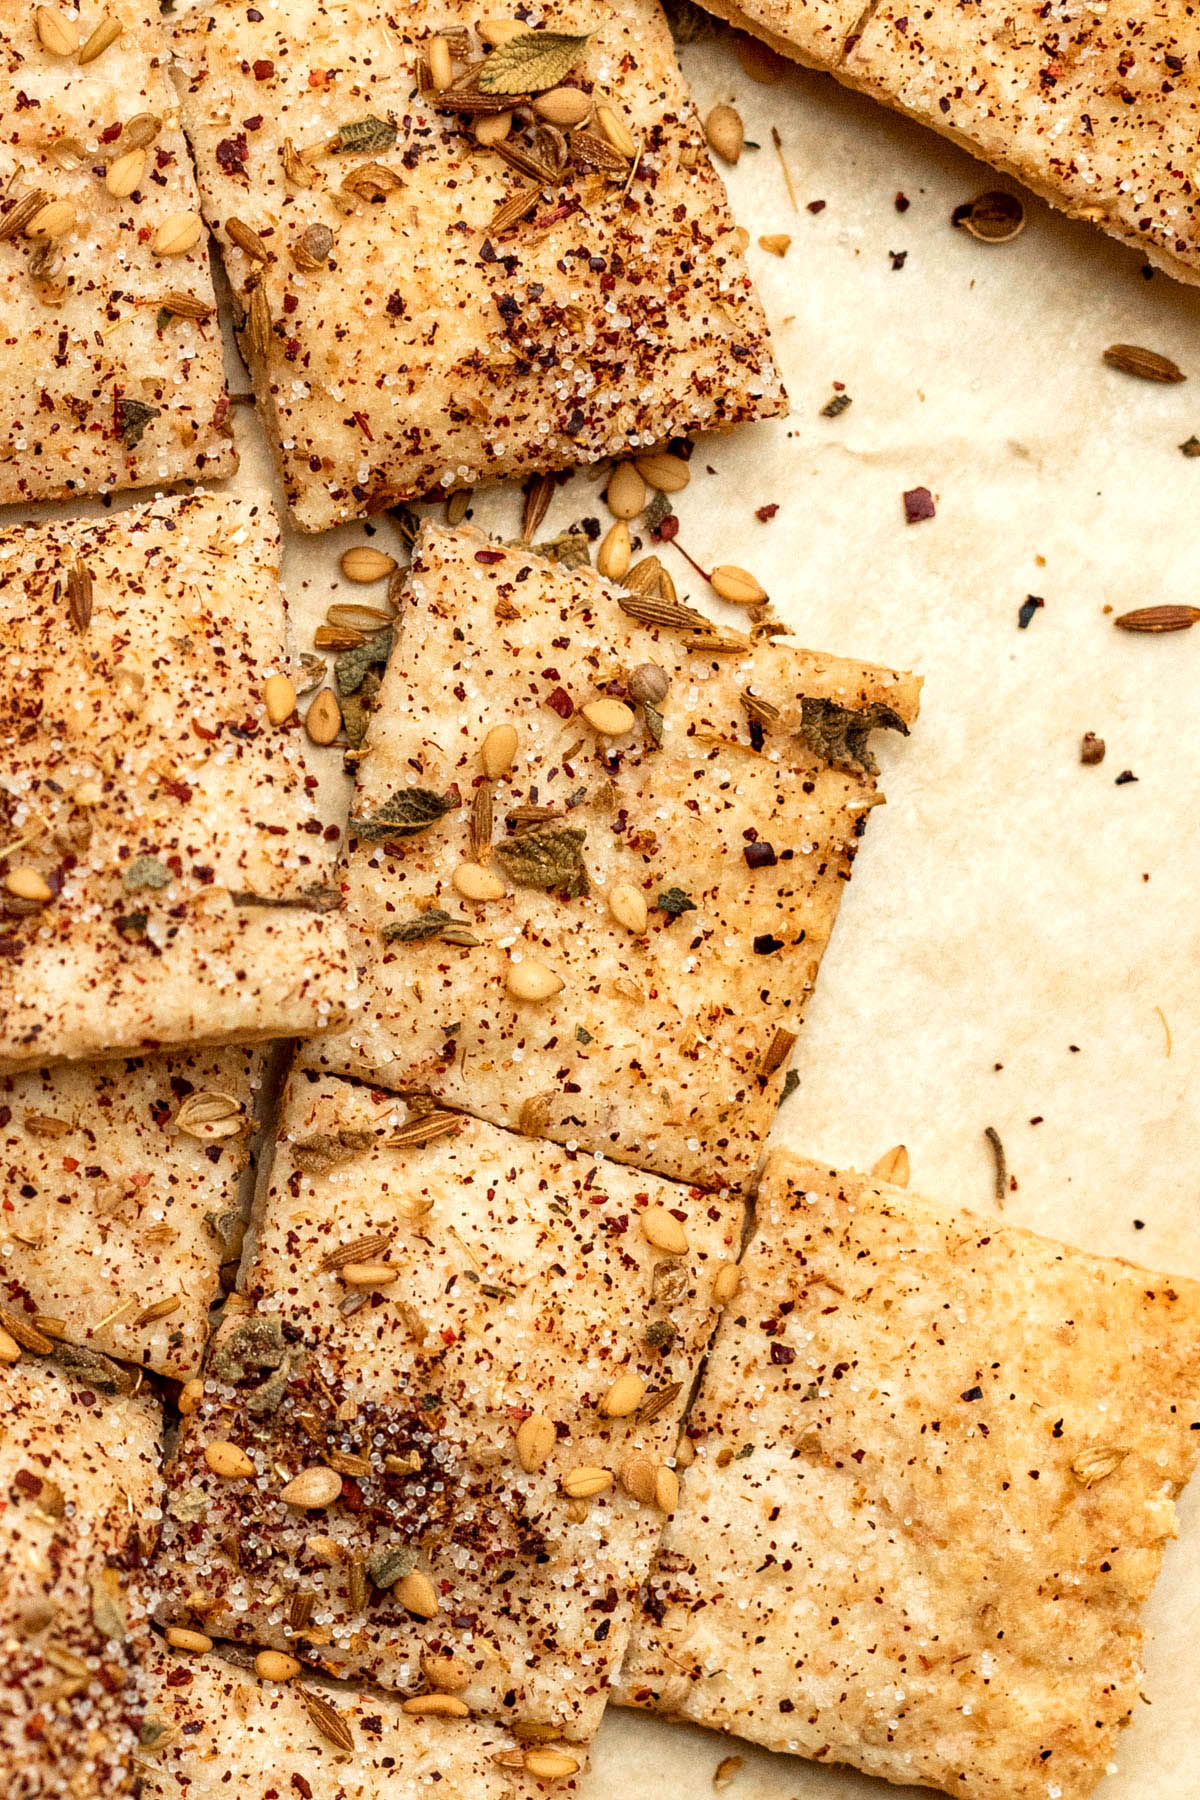 Sourdough discard crackers topped with homemade Za'atar spice blend.